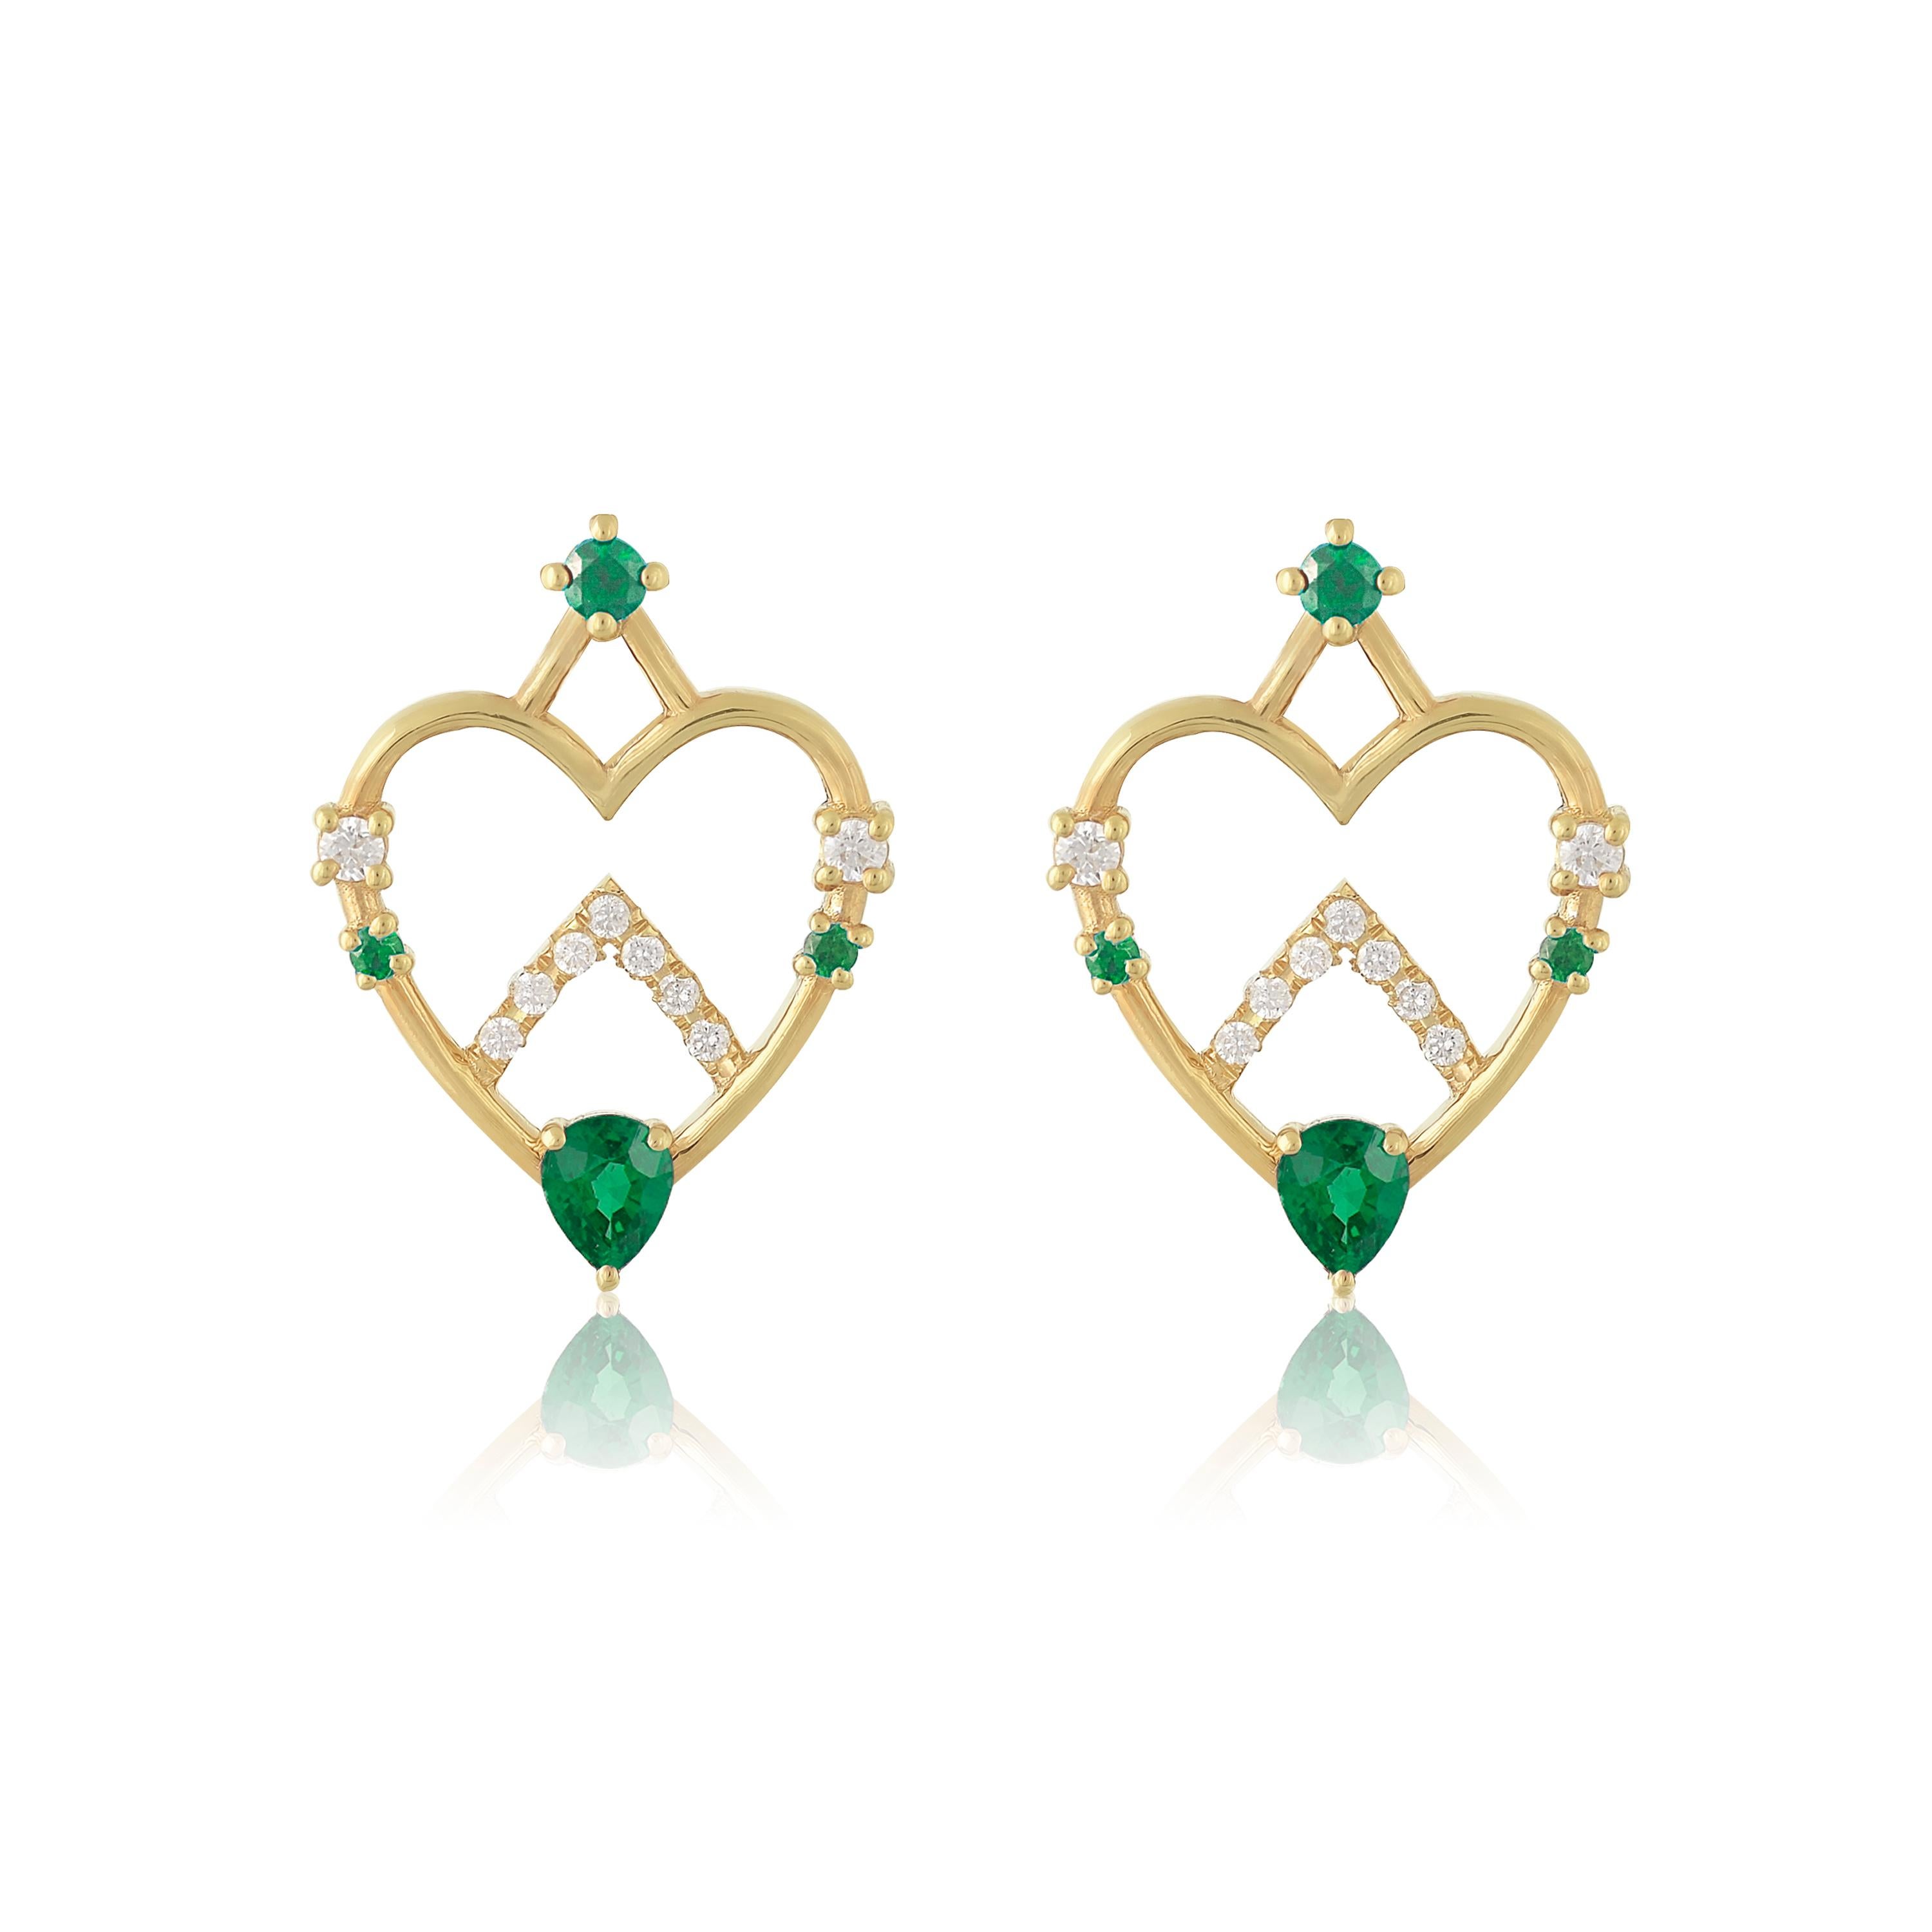 Designer: Alexia Gryllaki
Dimensions: L18x14mm
Weight: approximately 3.2g (pair)
Barcode: ING037EE

The Interlocking Geometry earrings in 18 karat yellow gold with emeralds approx. 0.46cts and round brilliant-cut diamonds approx. 0.13cts.

About the